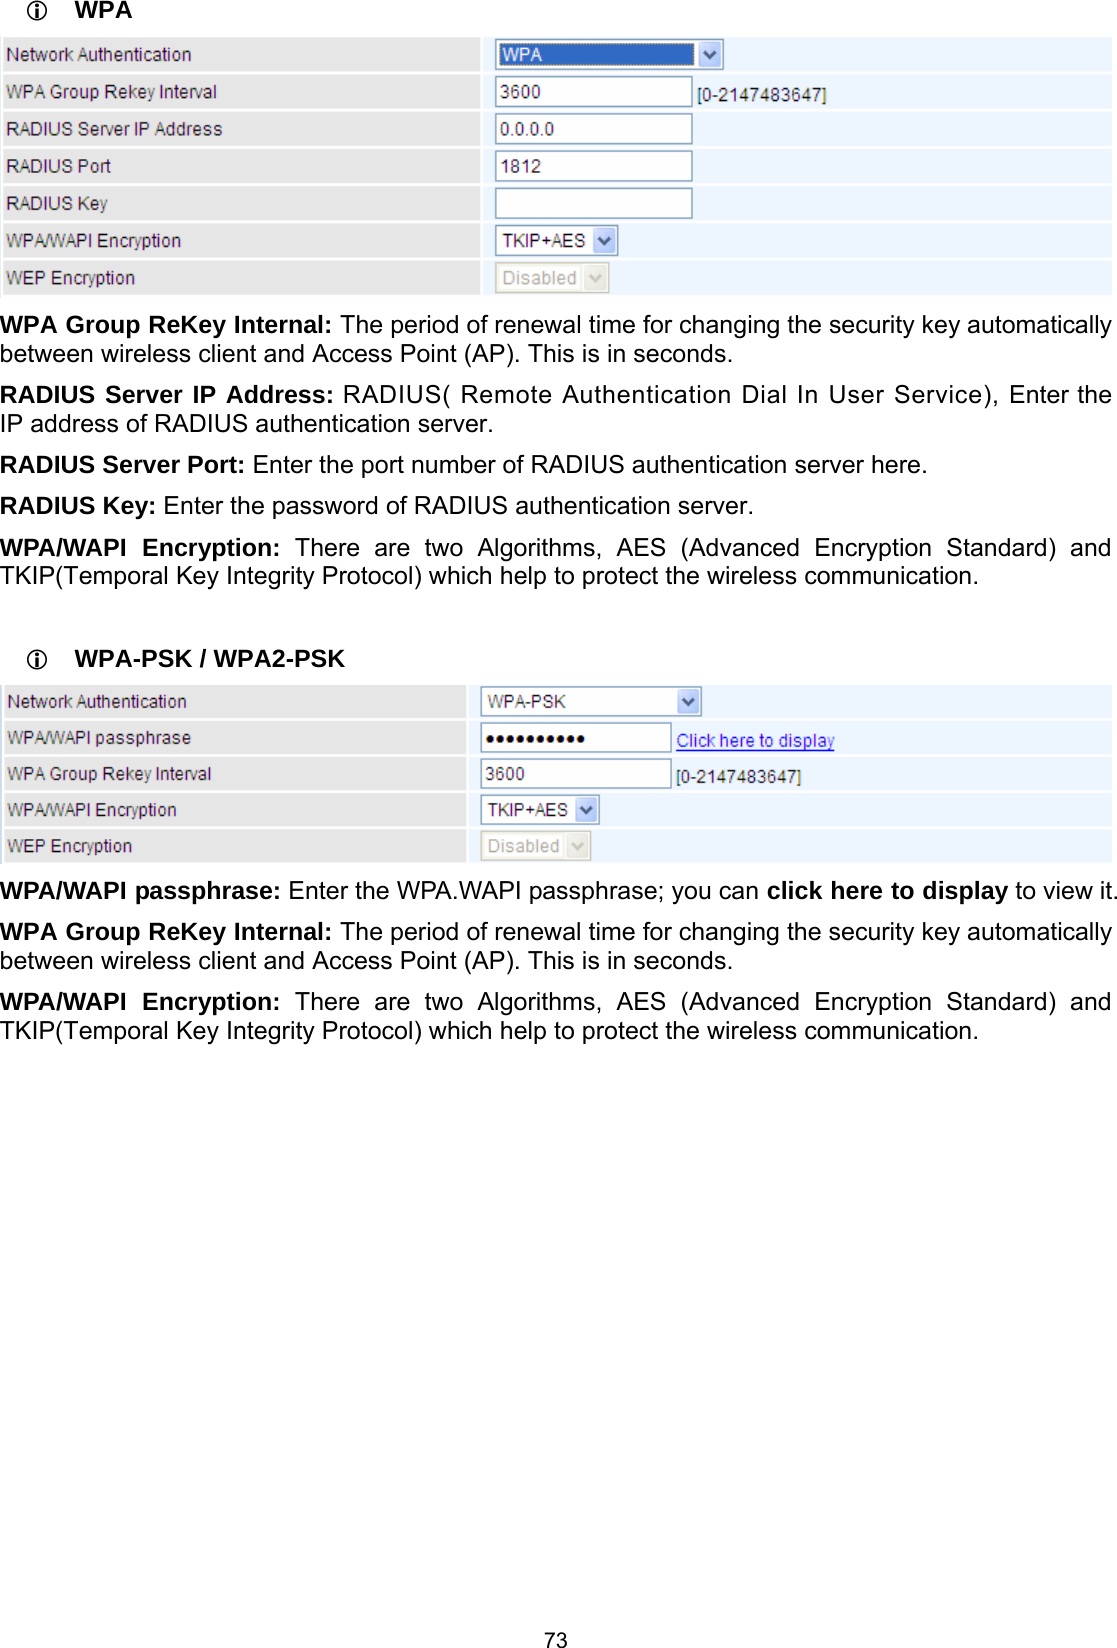  73  WPA  WPA Group ReKey Internal: The period of renewal time for changing the security key automatically between wireless client and Access Point (AP). This is in seconds. RADIUS Server IP Address: RADIUS( Remote Authentication Dial In User Service), Enter the IP address of RADIUS authentication server. RADIUS Server Port: Enter the port number of RADIUS authentication server here. RADIUS Key: Enter the password of RADIUS authentication server. WPA/WAPI Encryption: There are two Algorithms, AES (Advanced Encryption Standard) and TKIP(Temporal Key Integrity Protocol) which help to protect the wireless communication.   WPA-PSK / WPA2-PSK  WPA/WAPI passphrase: Enter the WPA.WAPI passphrase; you can click here to display to view it. WPA Group ReKey Internal: The period of renewal time for changing the security key automatically between wireless client and Access Point (AP). This is in seconds. WPA/WAPI Encryption: There are two Algorithms, AES (Advanced Encryption Standard) and TKIP(Temporal Key Integrity Protocol) which help to protect the wireless communication.              